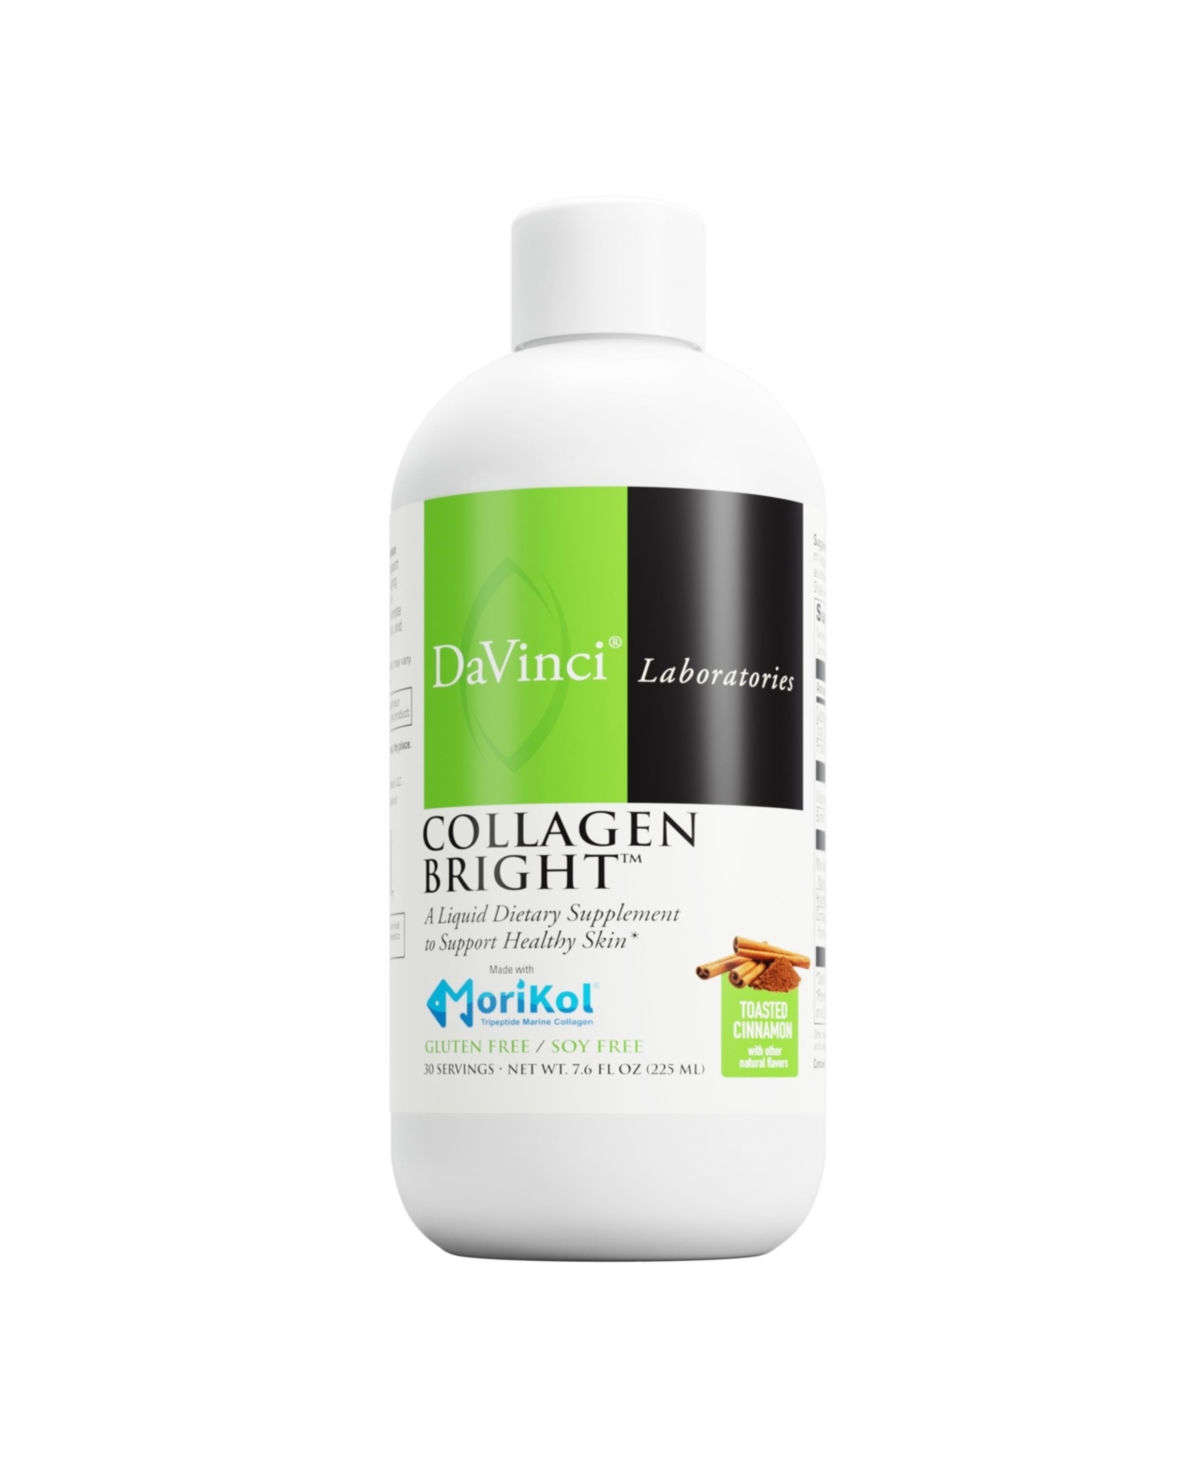 Collagen Bright - A Liquid Dietary Supplement to Support Healthy Skin - Gluten Free, Soy Free - Mint Chocolate - Brown